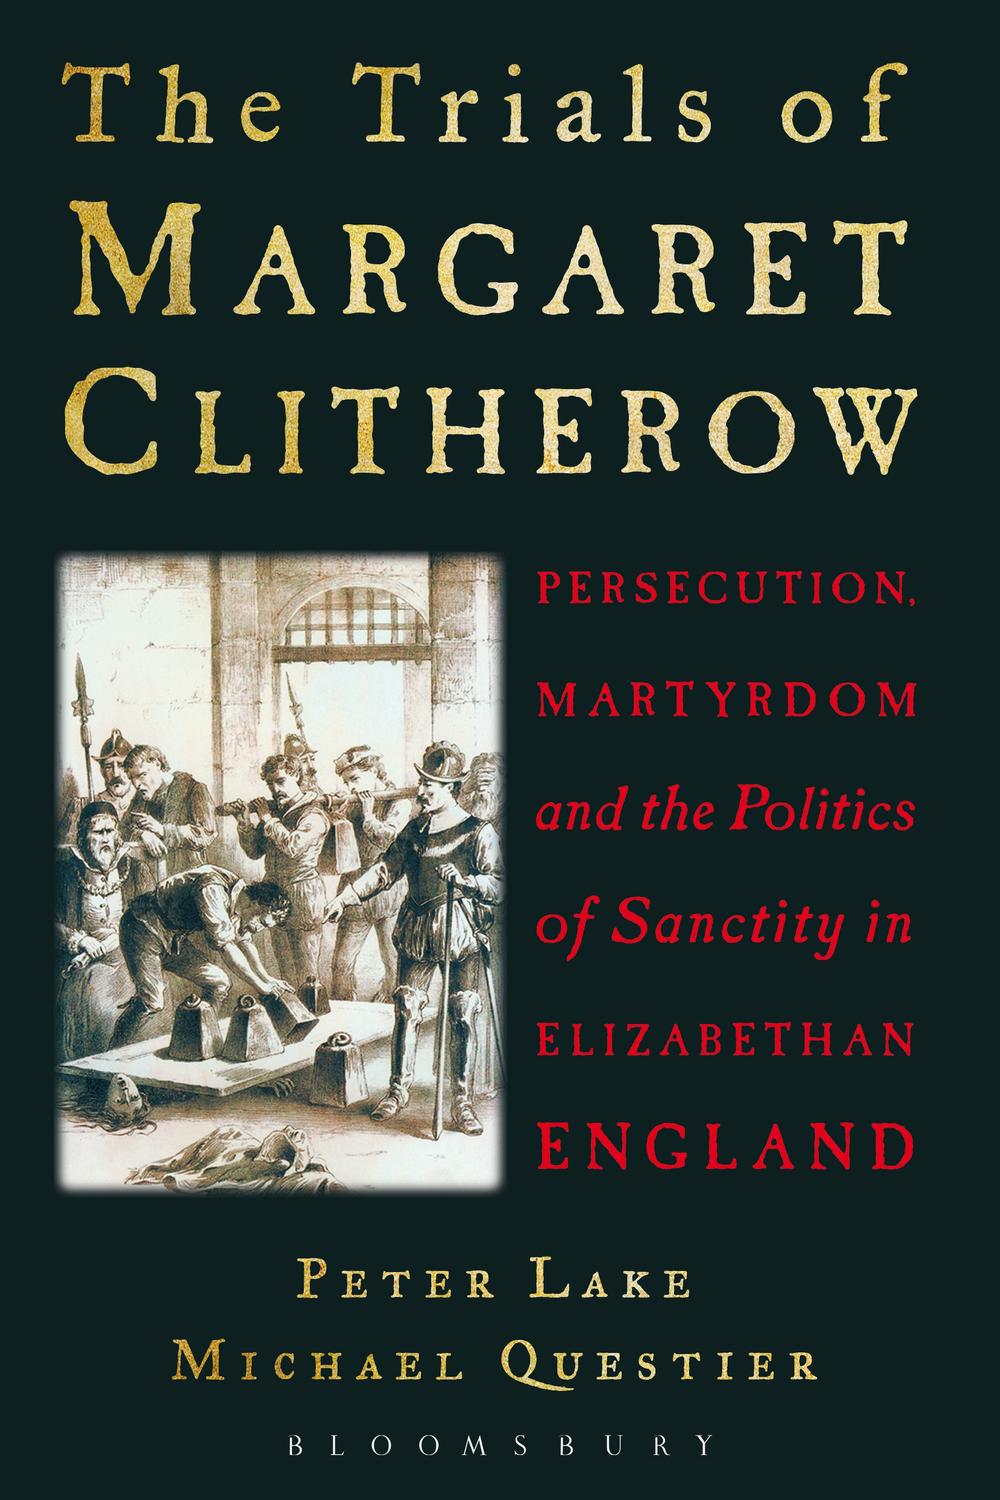 The Trials of Margaret Clitherow - Peter Lake, Michael Questier